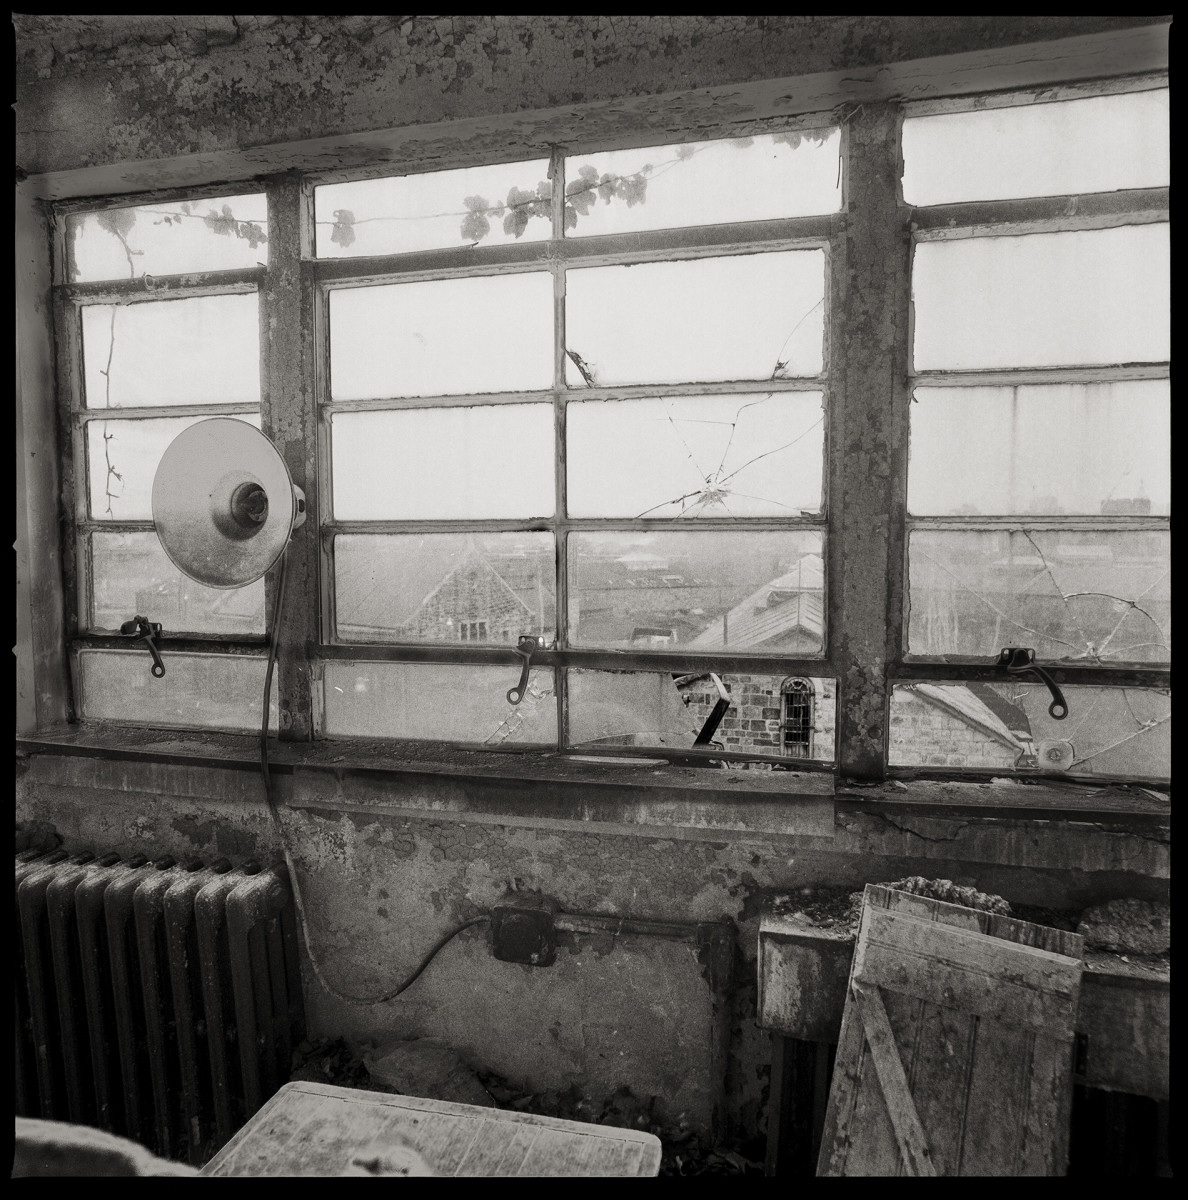 View from the Guard Tower by Eric T. Kunsman  Image: ID: A black and white image shows a view through a cracked window.  In front of the window is an old radiator.  Beyond the window there are buildings visible.